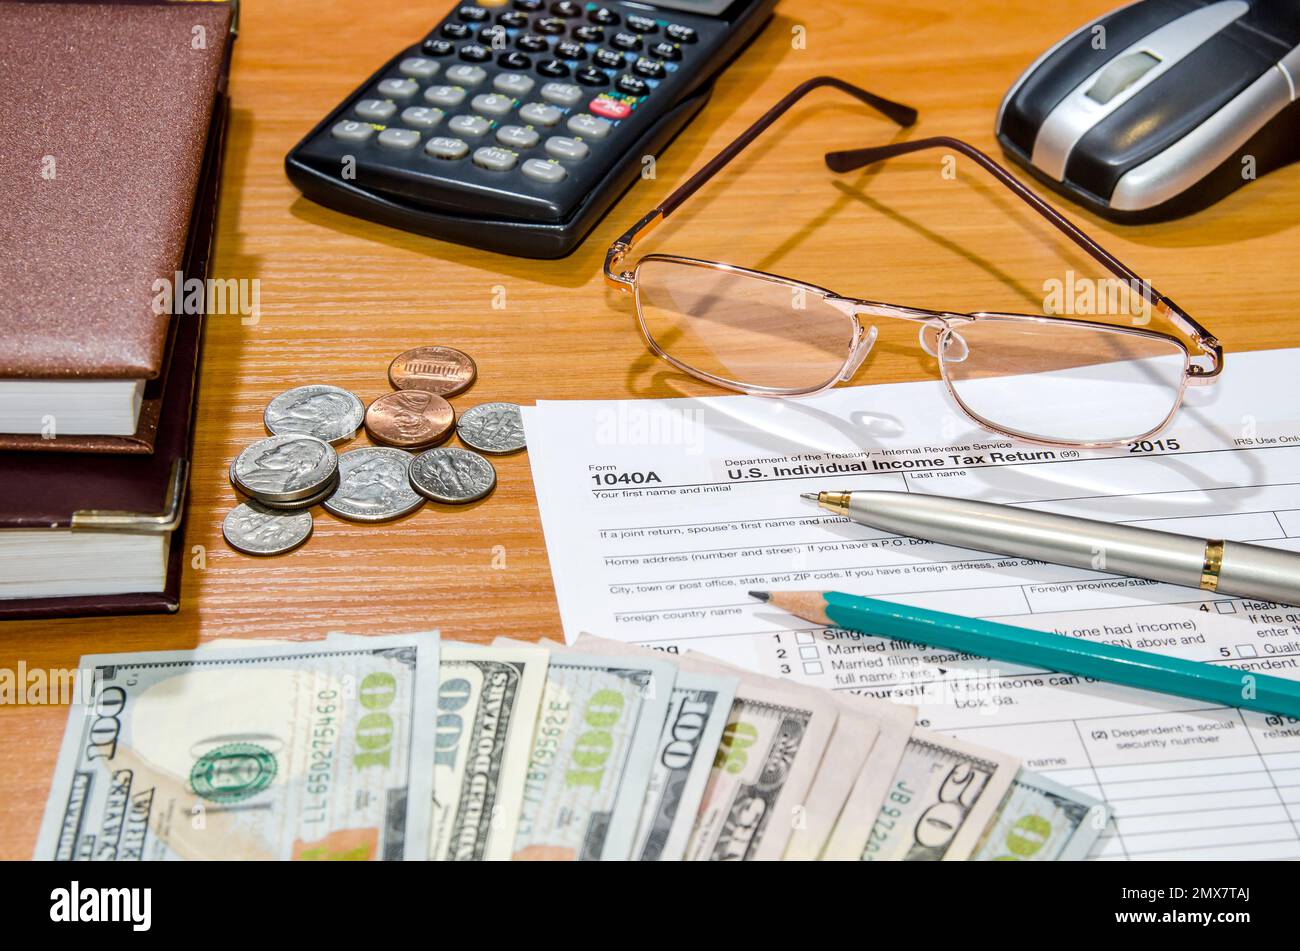 1040 Tax form for 2016 with pen, glasses, dollars and calculator Stock Photo